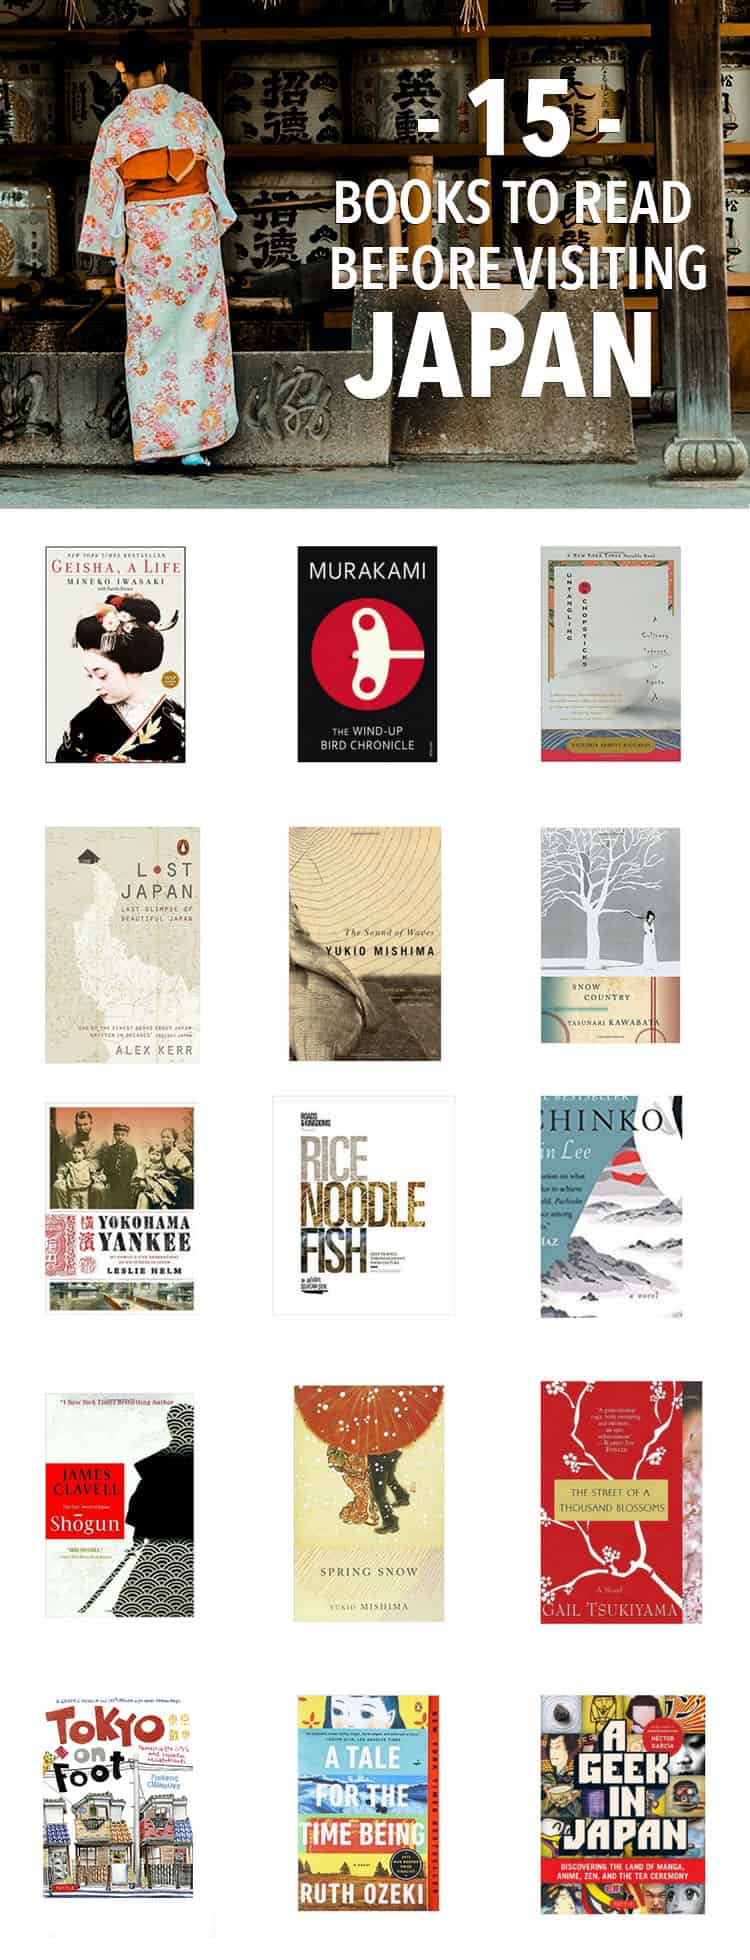 20 Fascinating Books About Japan to Read Before You Visit